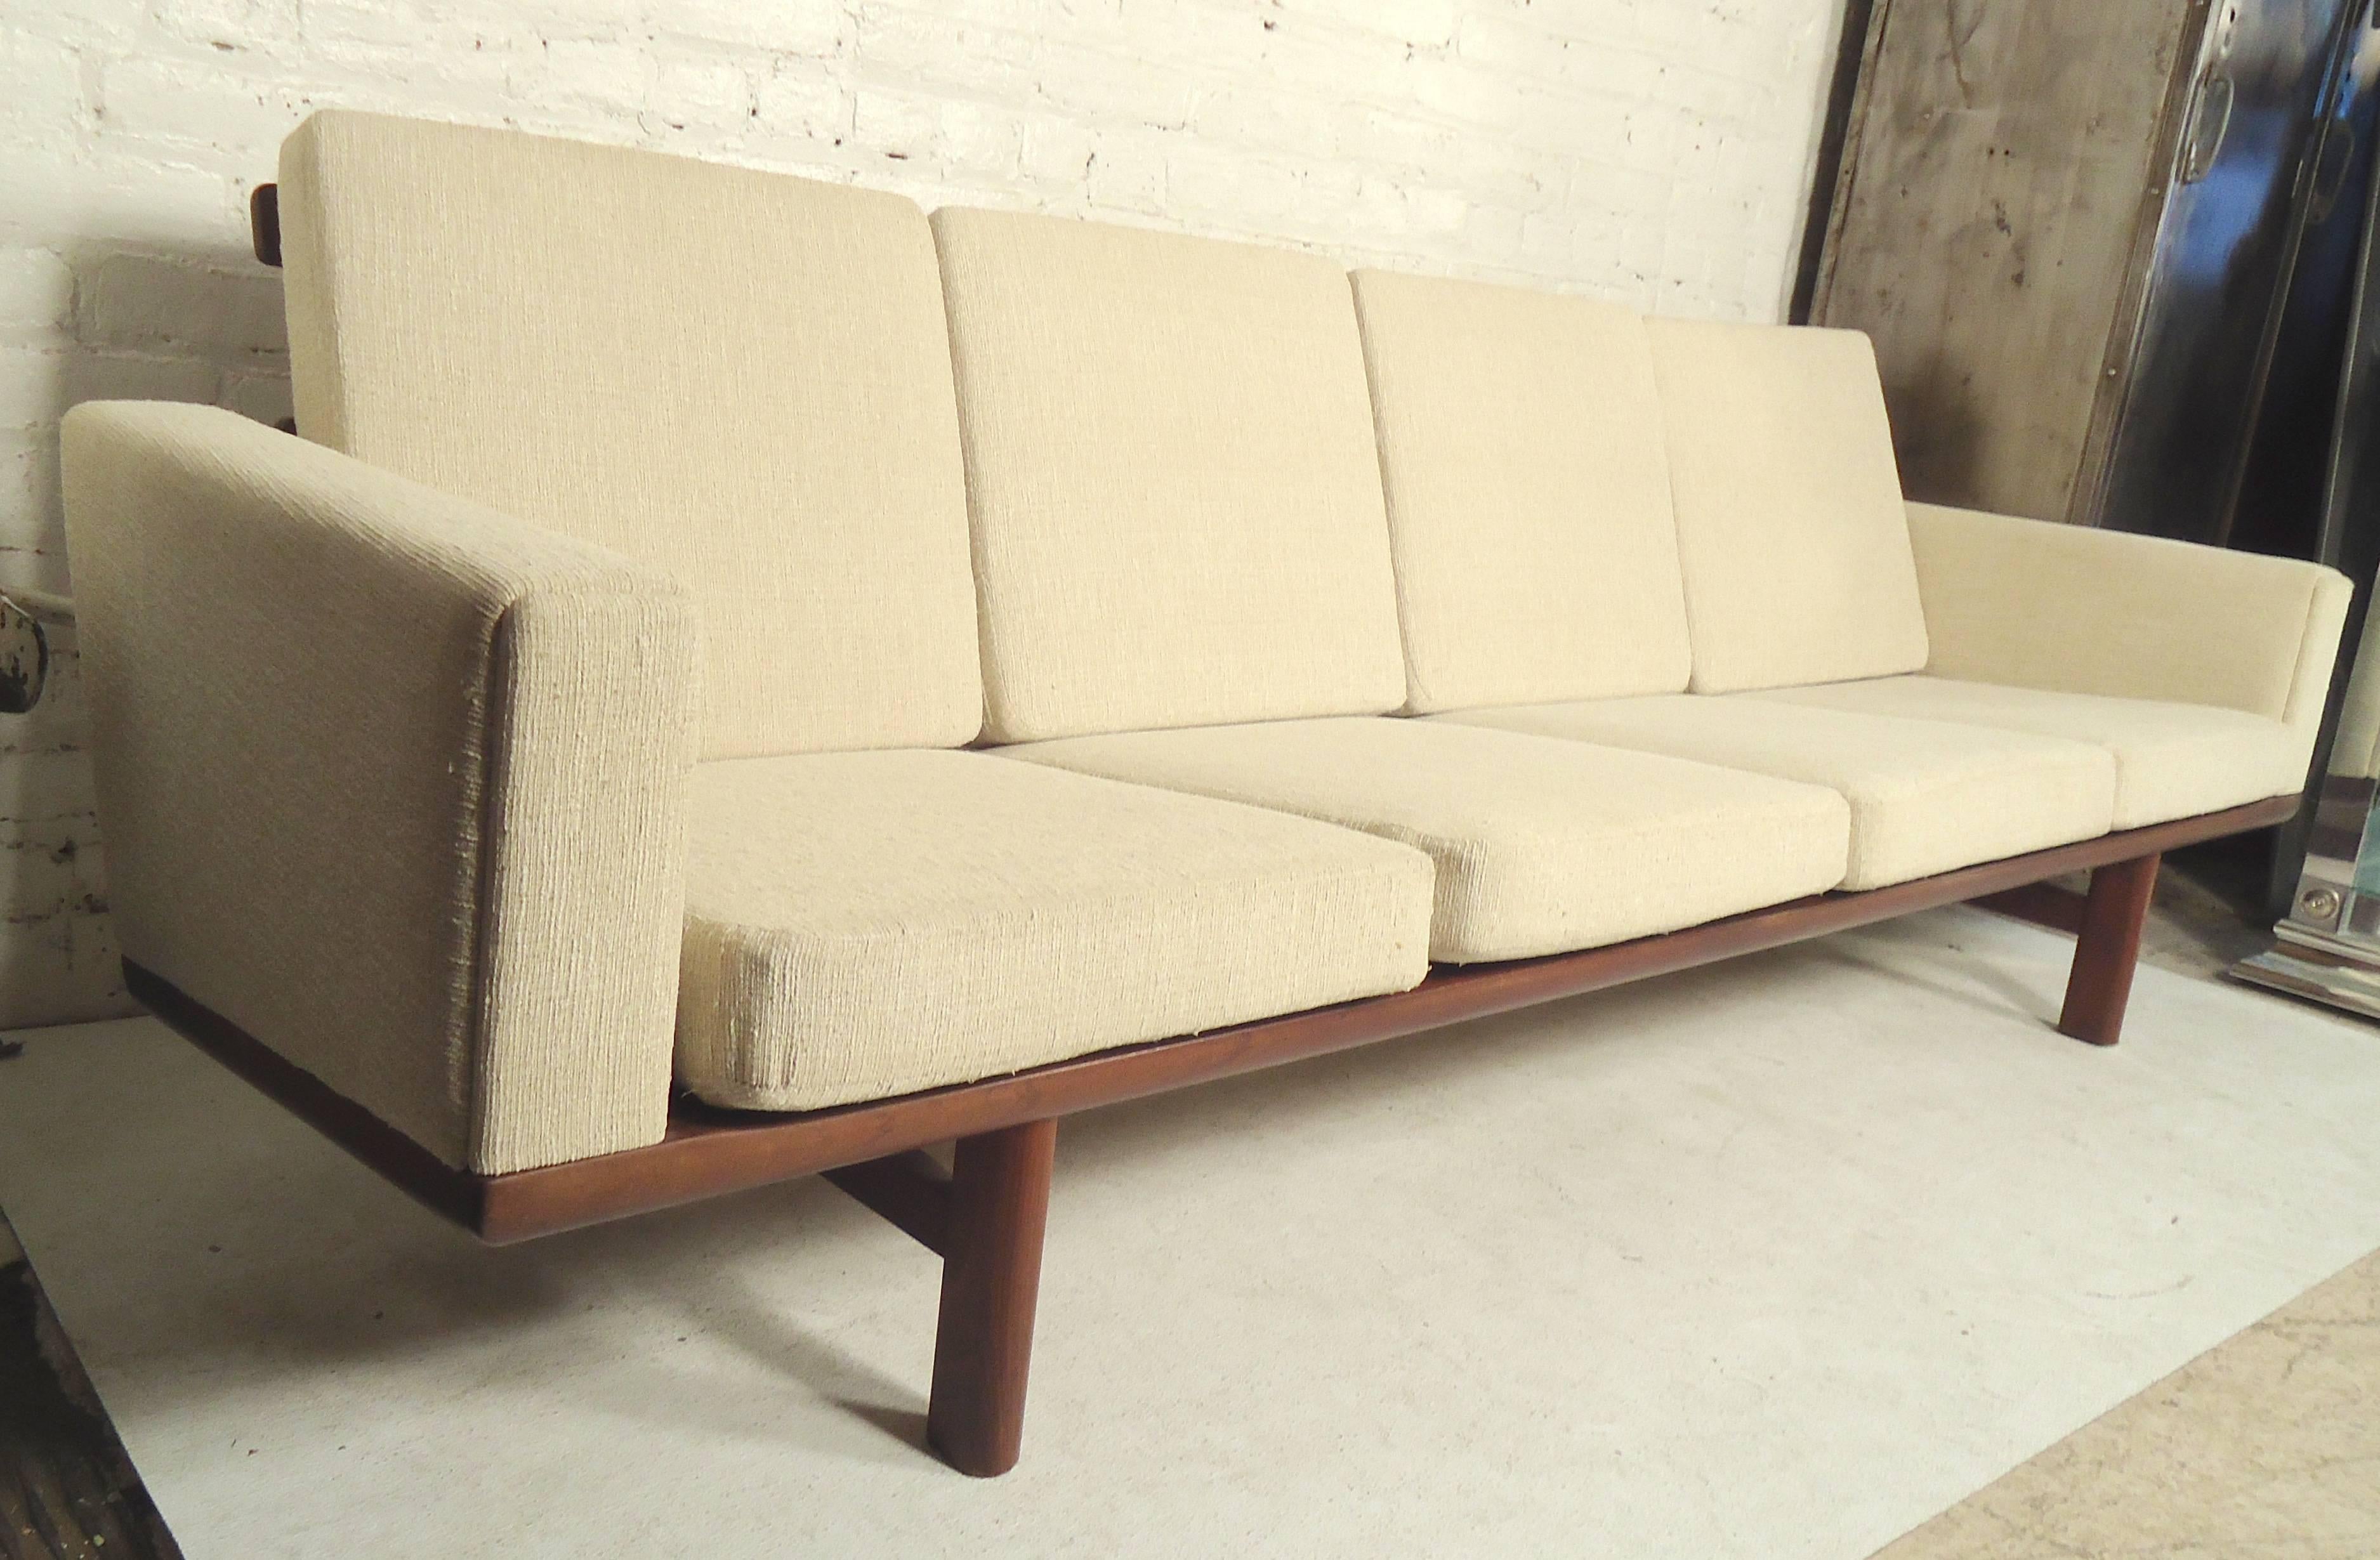 Beautiful four seat sofa by Hans Wegner for GETAMA. Clean fabric on a dark walnut frame. Great design with clean modern lines.

(Please confirm item location - NY or NJ - with dealer).
 